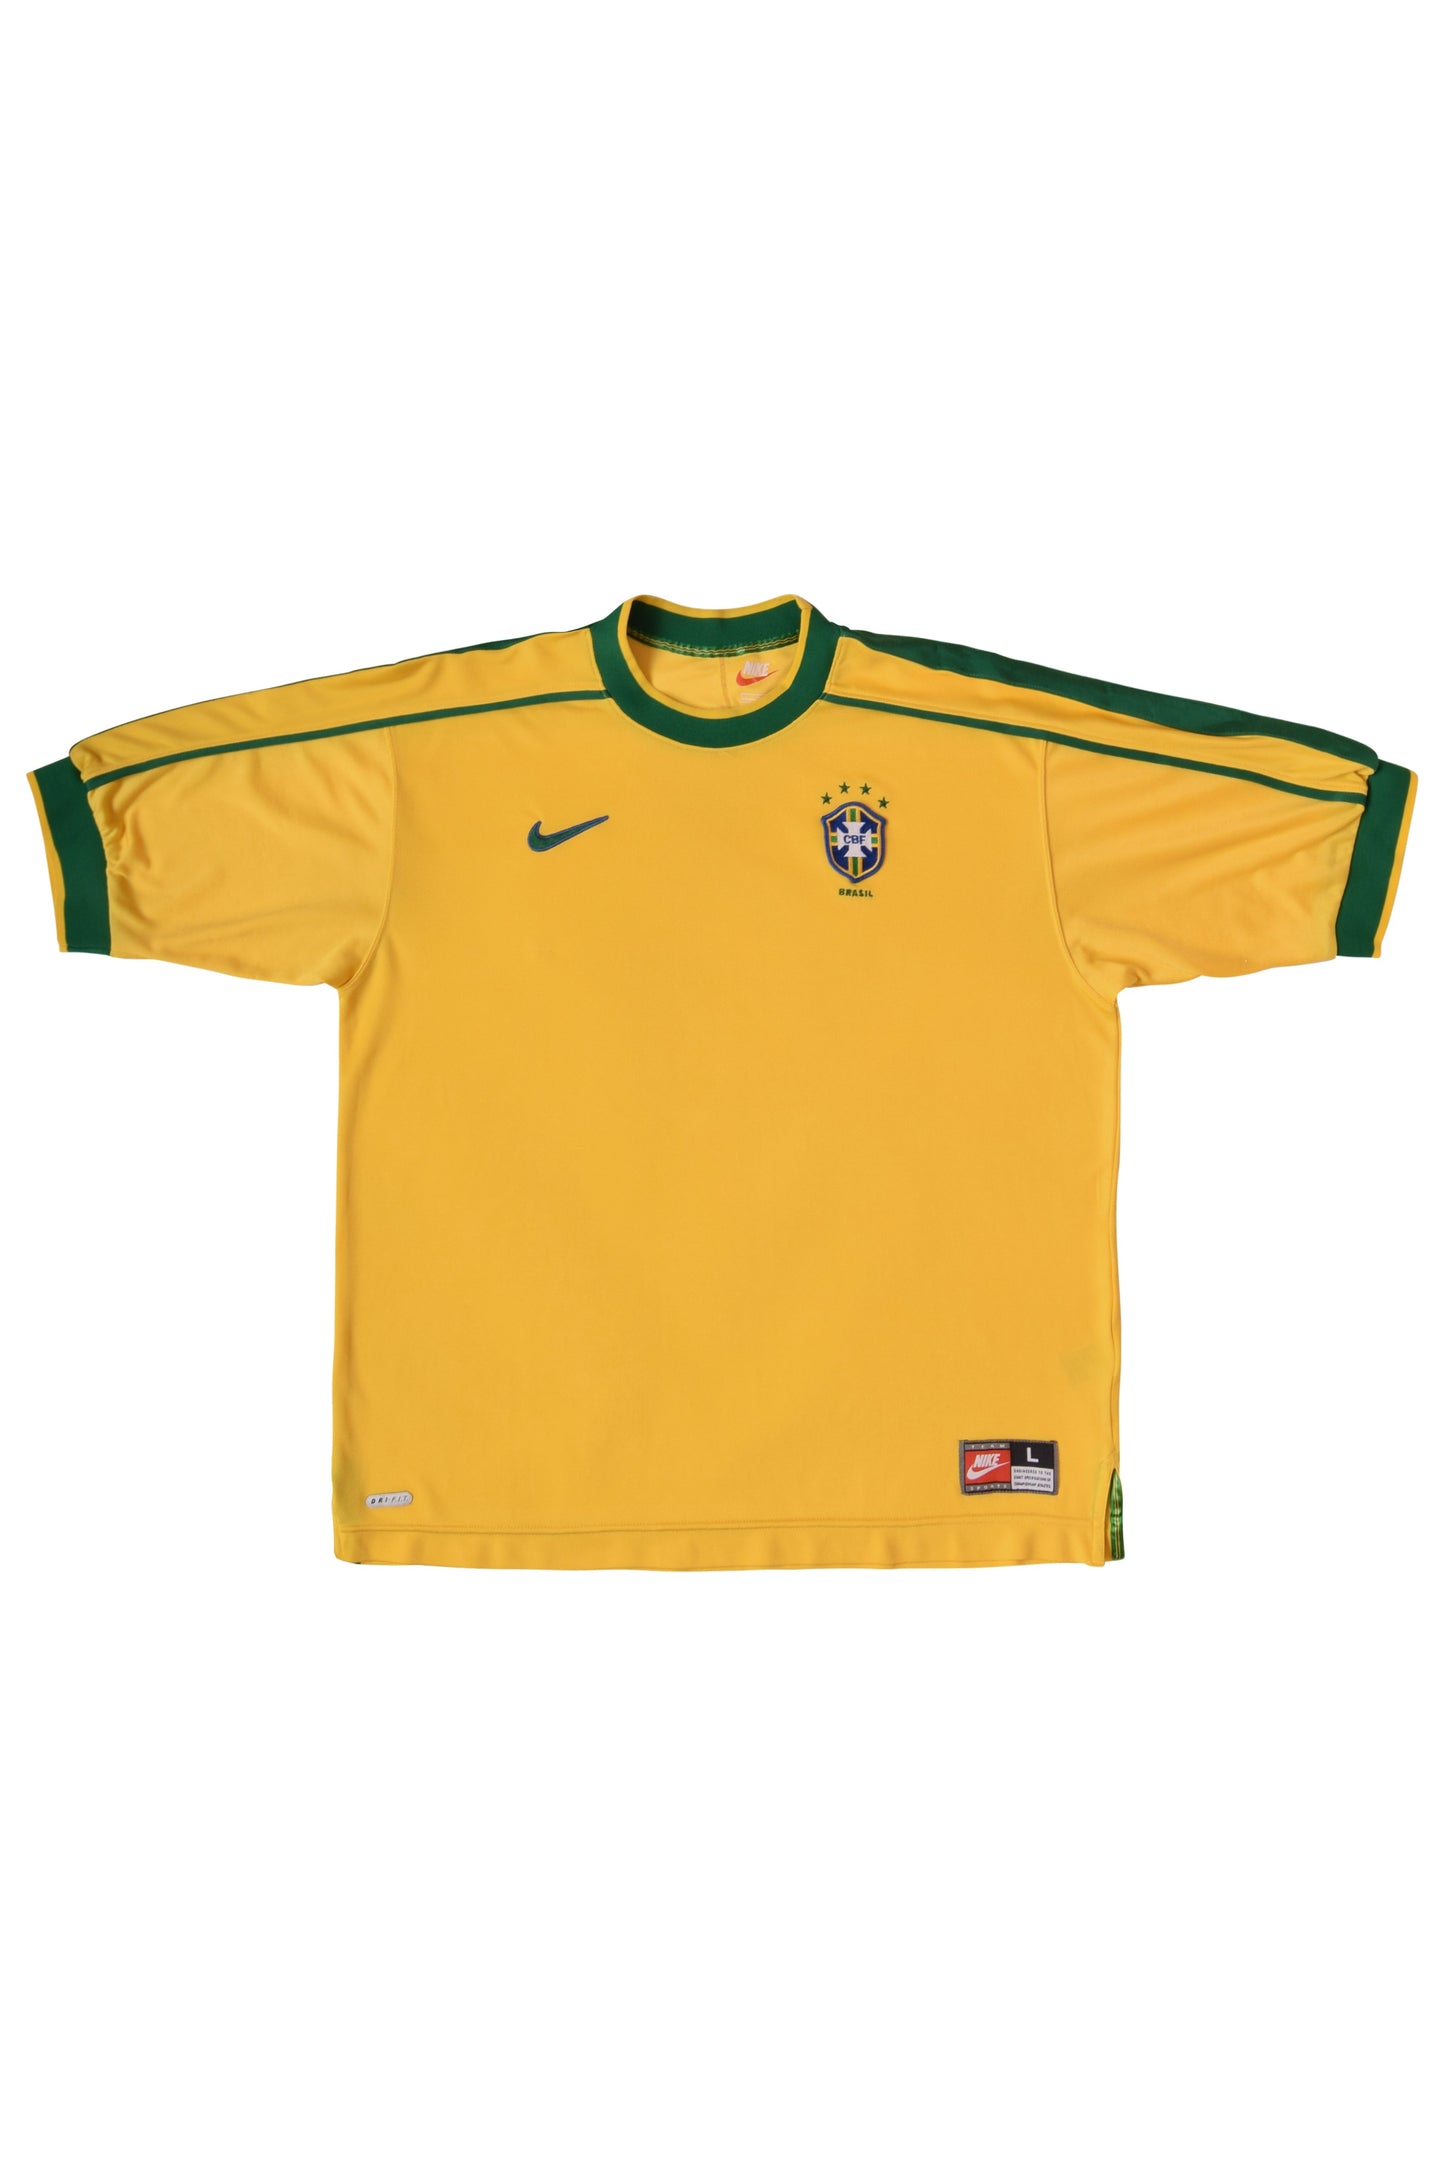 Vintage Nike Brazil 1998 - 2000 Home Football Shirt Size L Yellow Green Made in UK